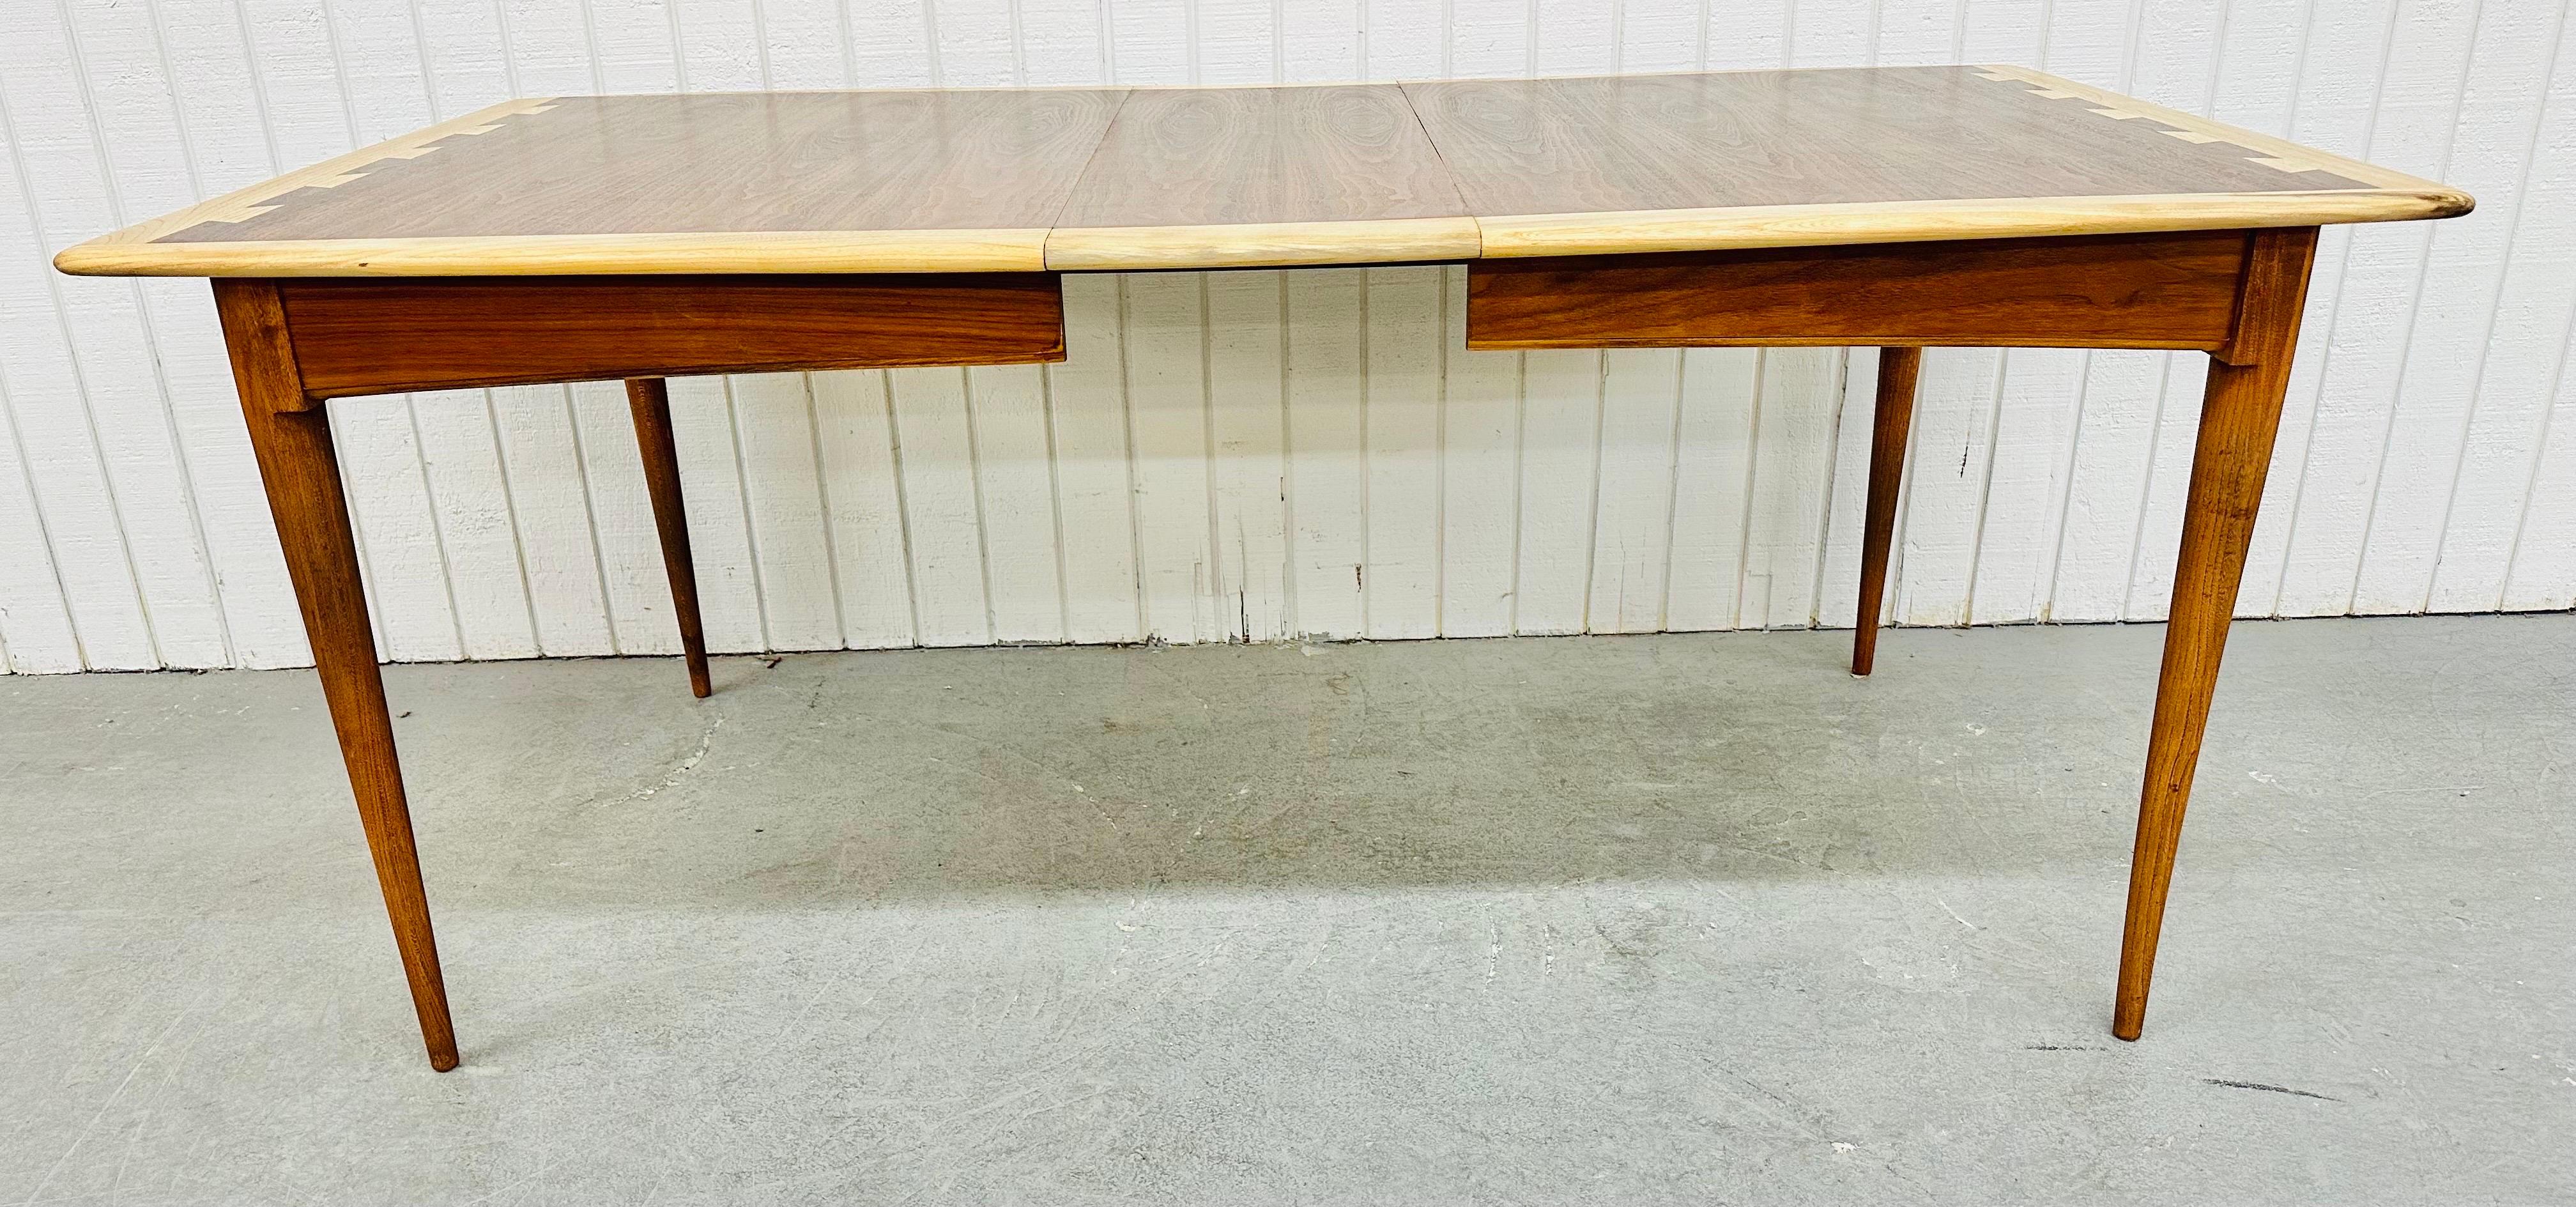 20th Century Mid-Century Modern Lane Acclaimed Walnut Dining Table For Sale